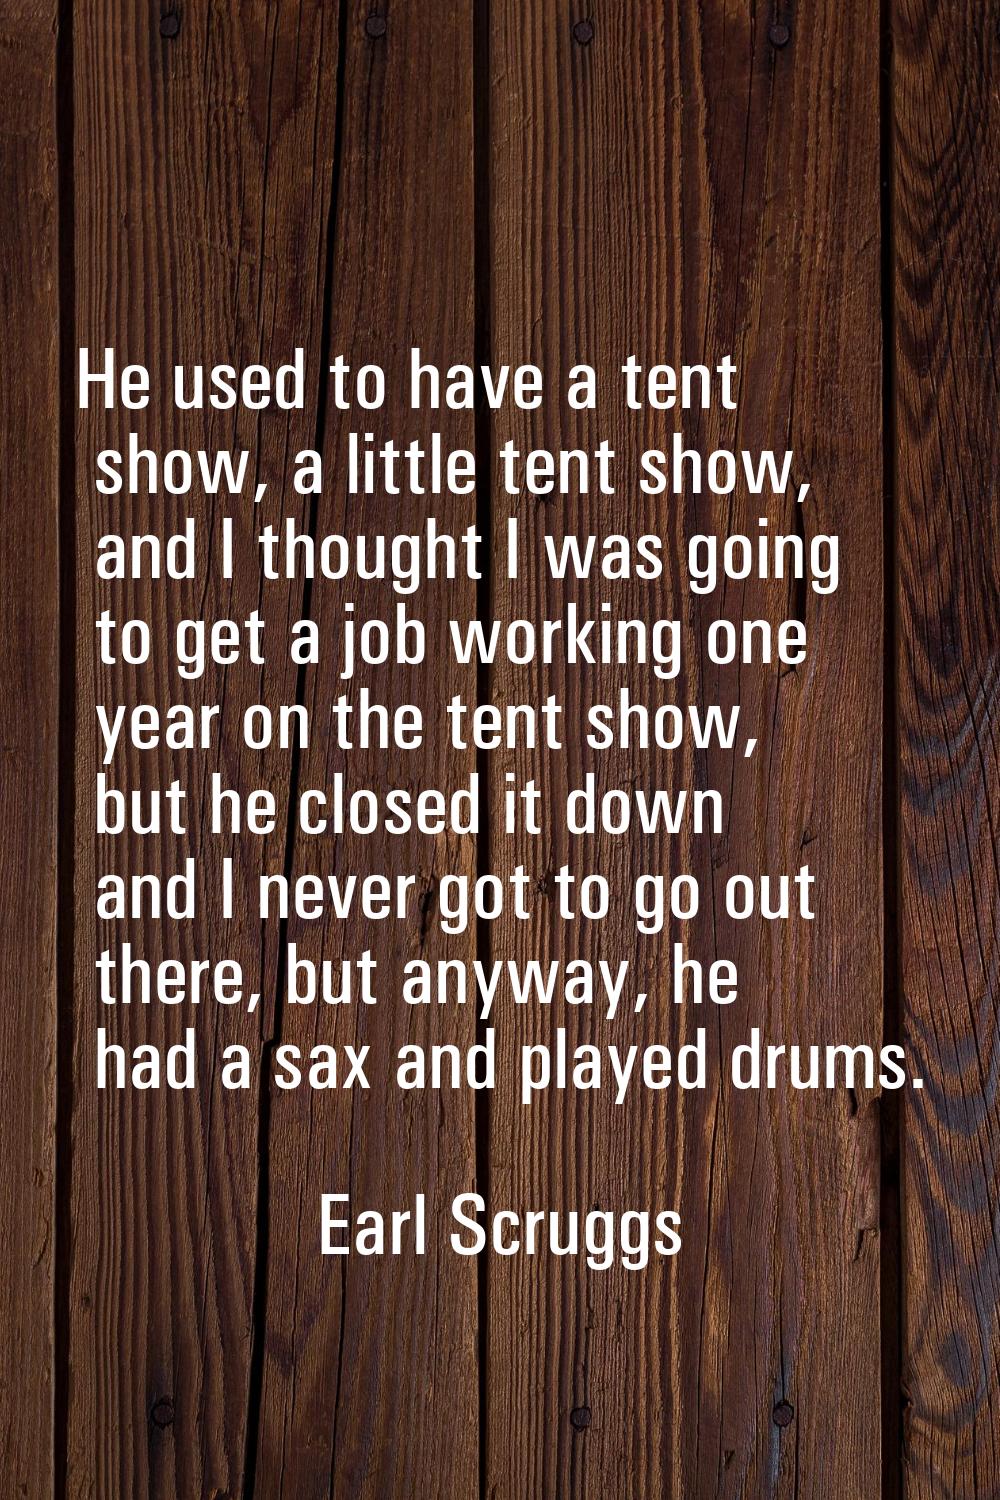 He used to have a tent show, a little tent show, and I thought I was going to get a job working one